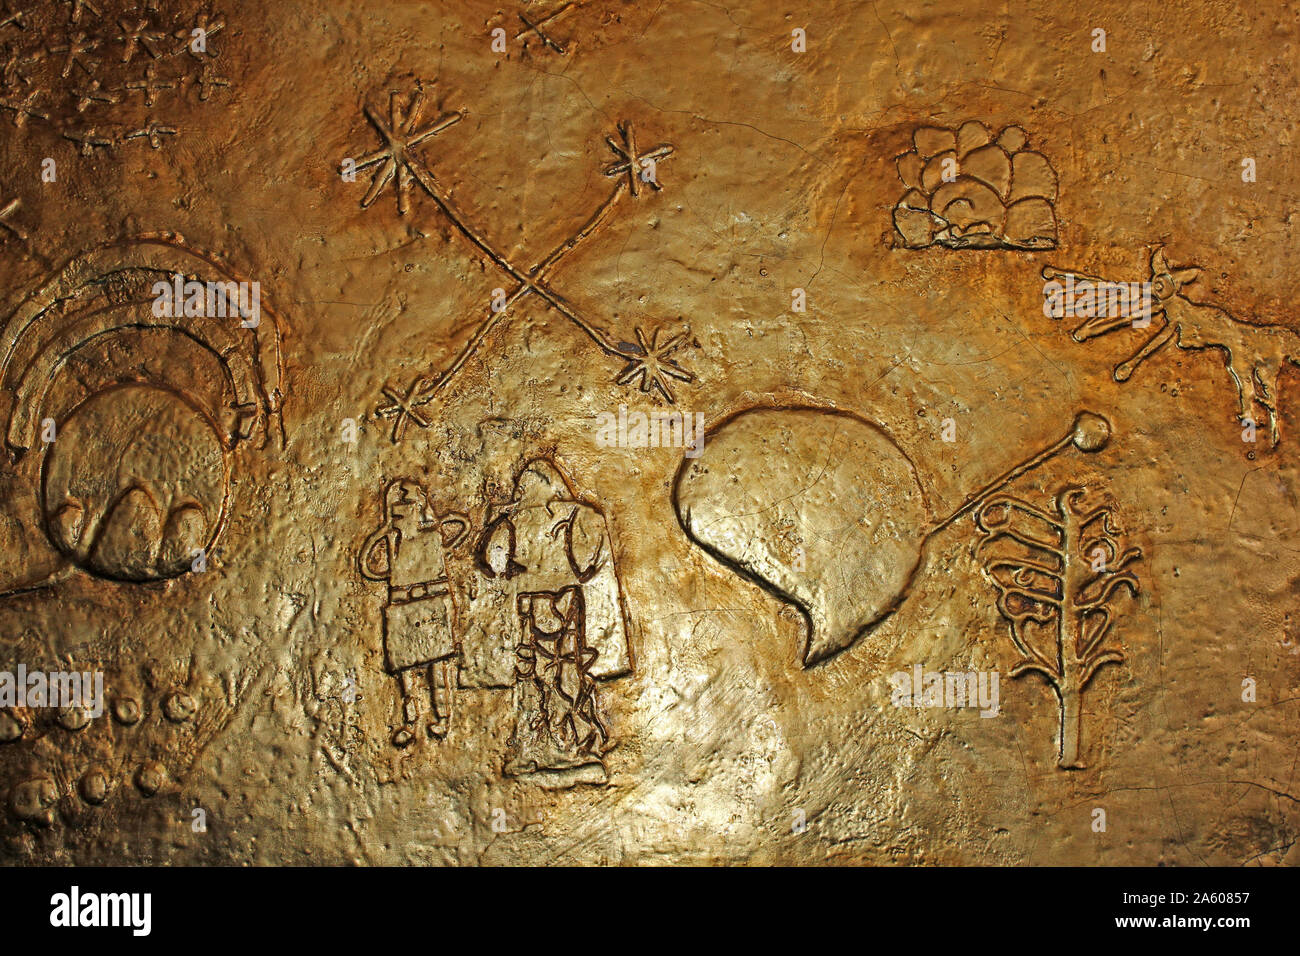 Detail On A Golden Plaque Representing A Map Of The Cults Of the Temple Of Qoricancha During Incan Times Stock Photo